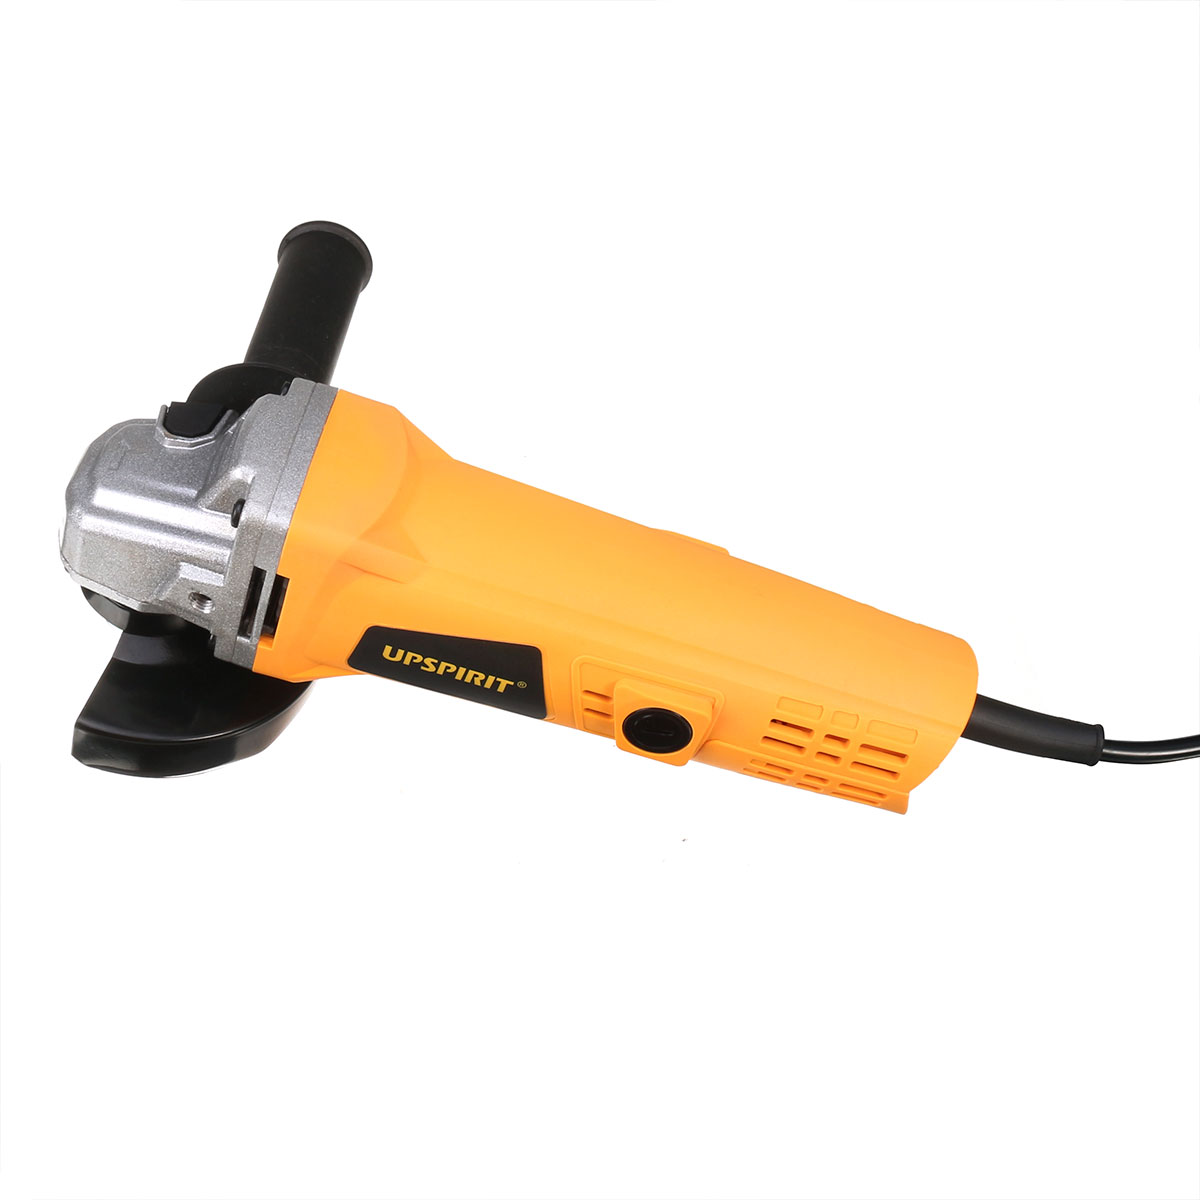 700W-Electric-Angle-Grinder-100mm-Polishing-Polisher-Grinding-Cutting-Tool-10000RPM-1560434-4